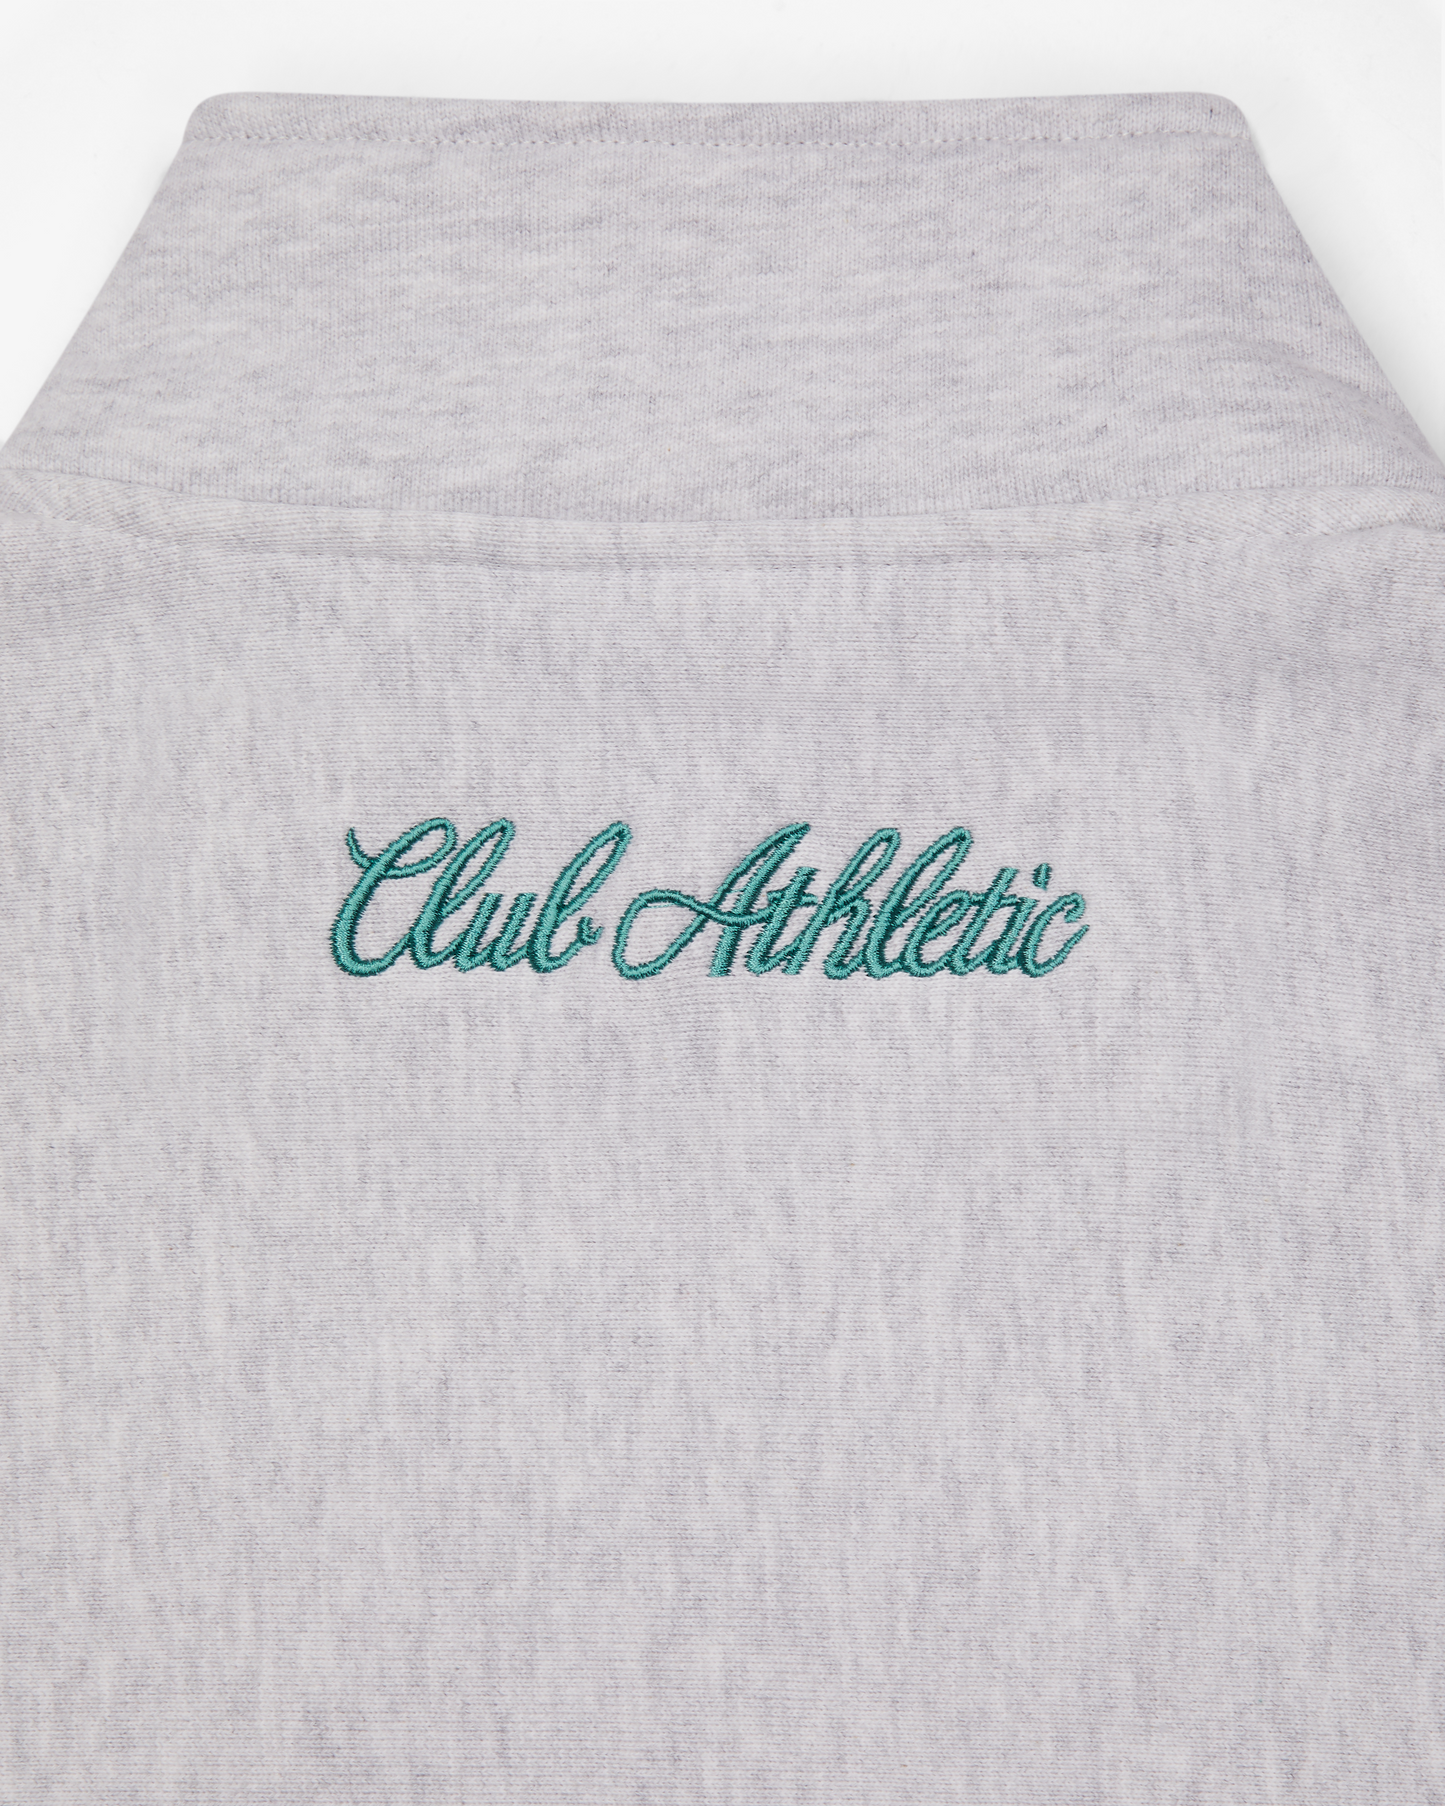 CLUB ATHLETIC GREY MARL EMBROIDERED QUARTER ZIP